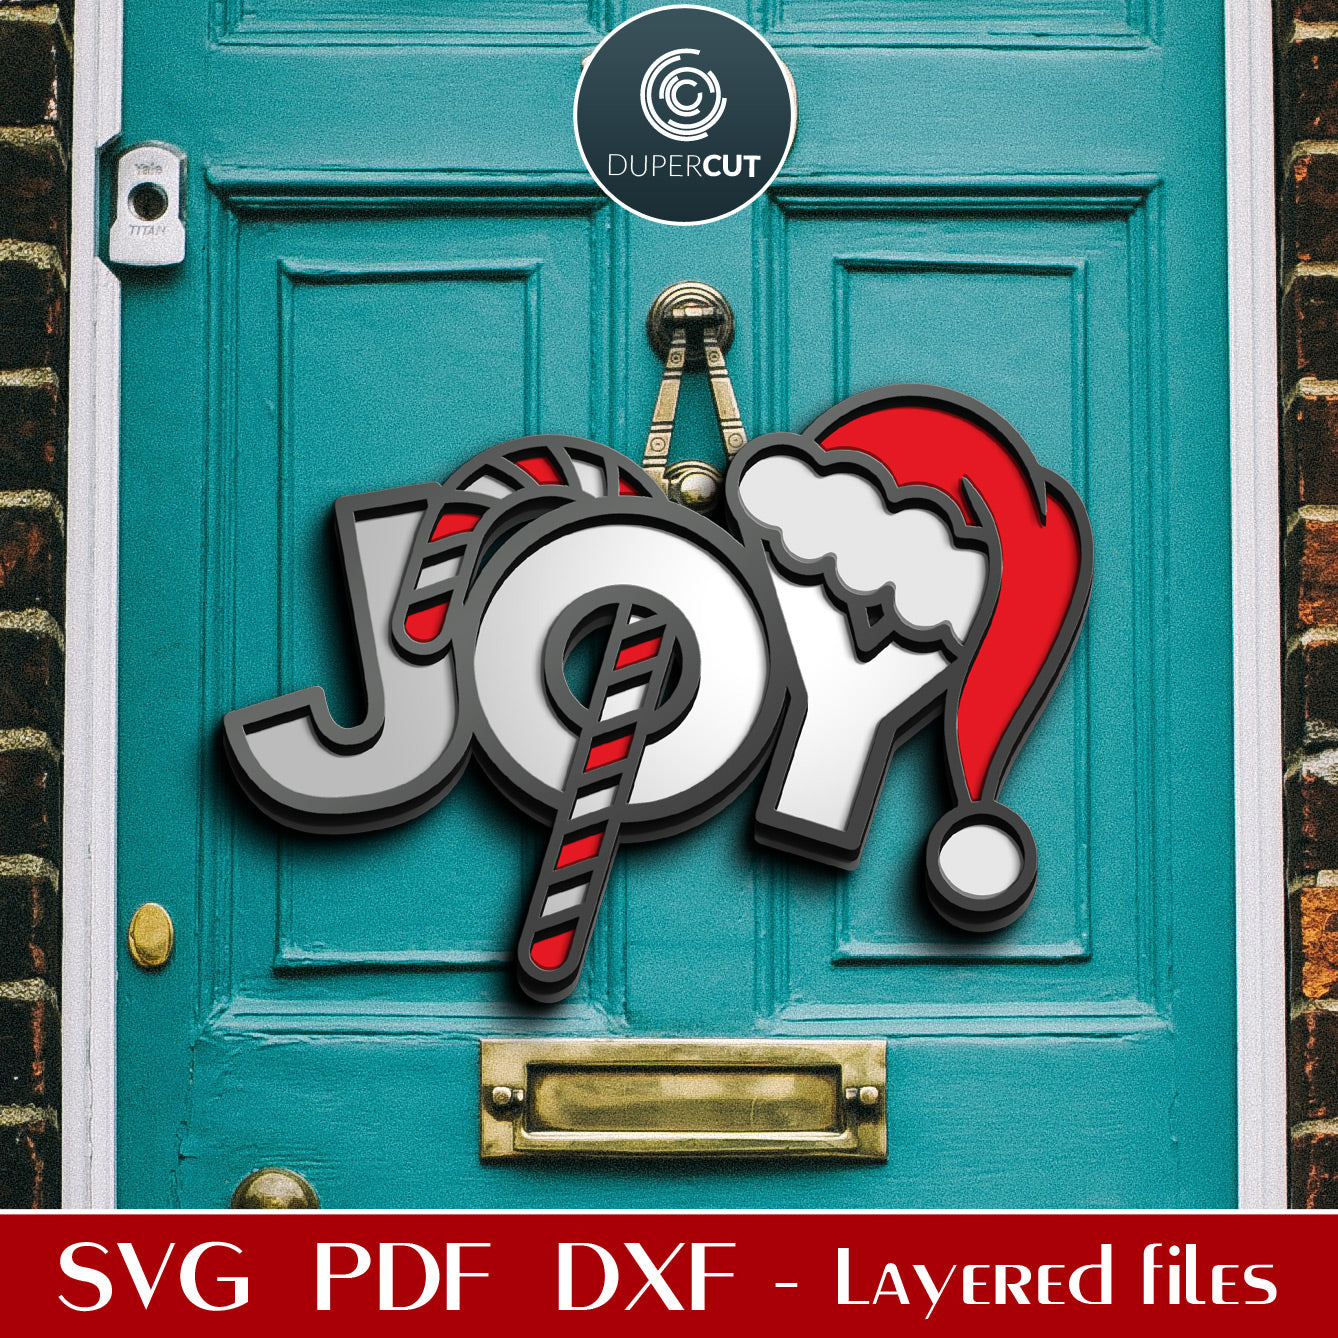 JOY fun DIY holiday sign with candy cane and Santa's hat SVG DXF layered vector cutting files for laser and digital machines - Glowforge, Cricut, Silhouette cameo, CNC plasma by DuperCut